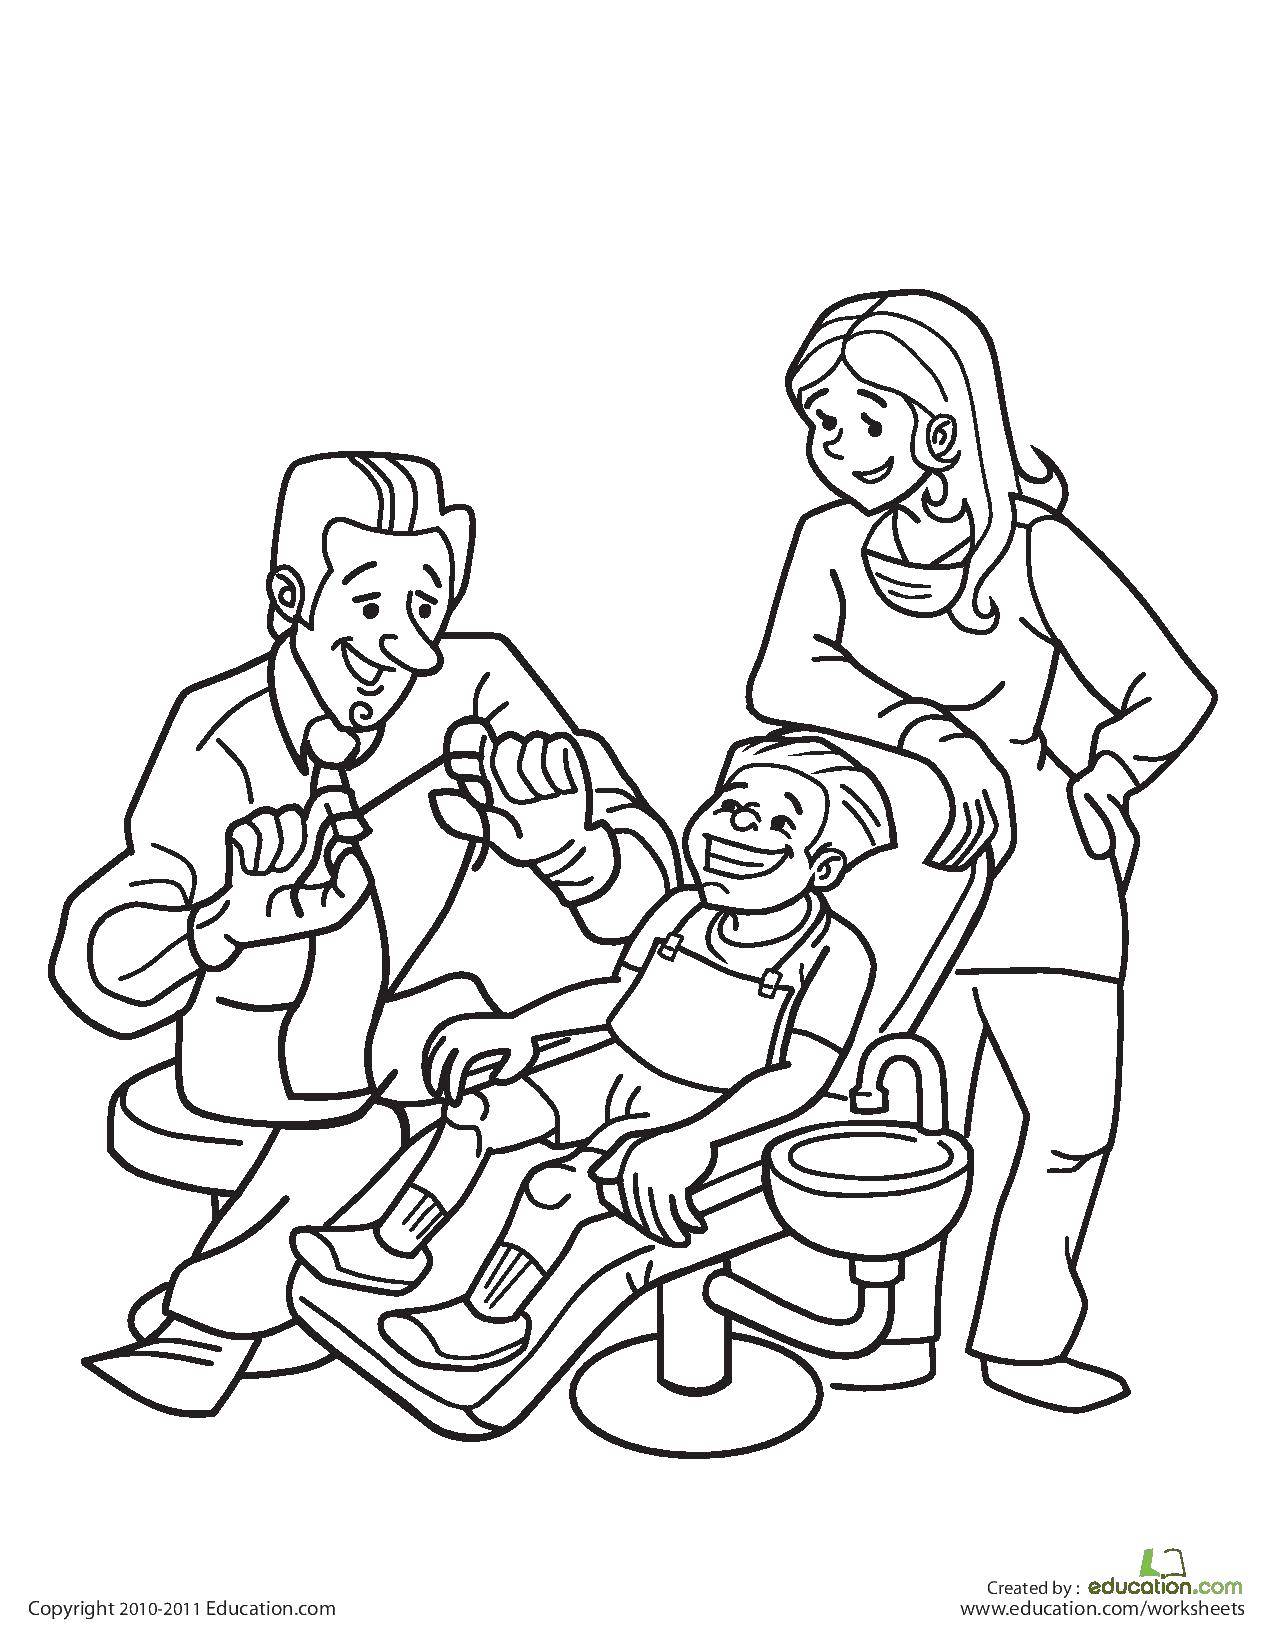 Coloring Baby at the dentist. Category The care of teeth. Tags:  the boy, floss, mom.